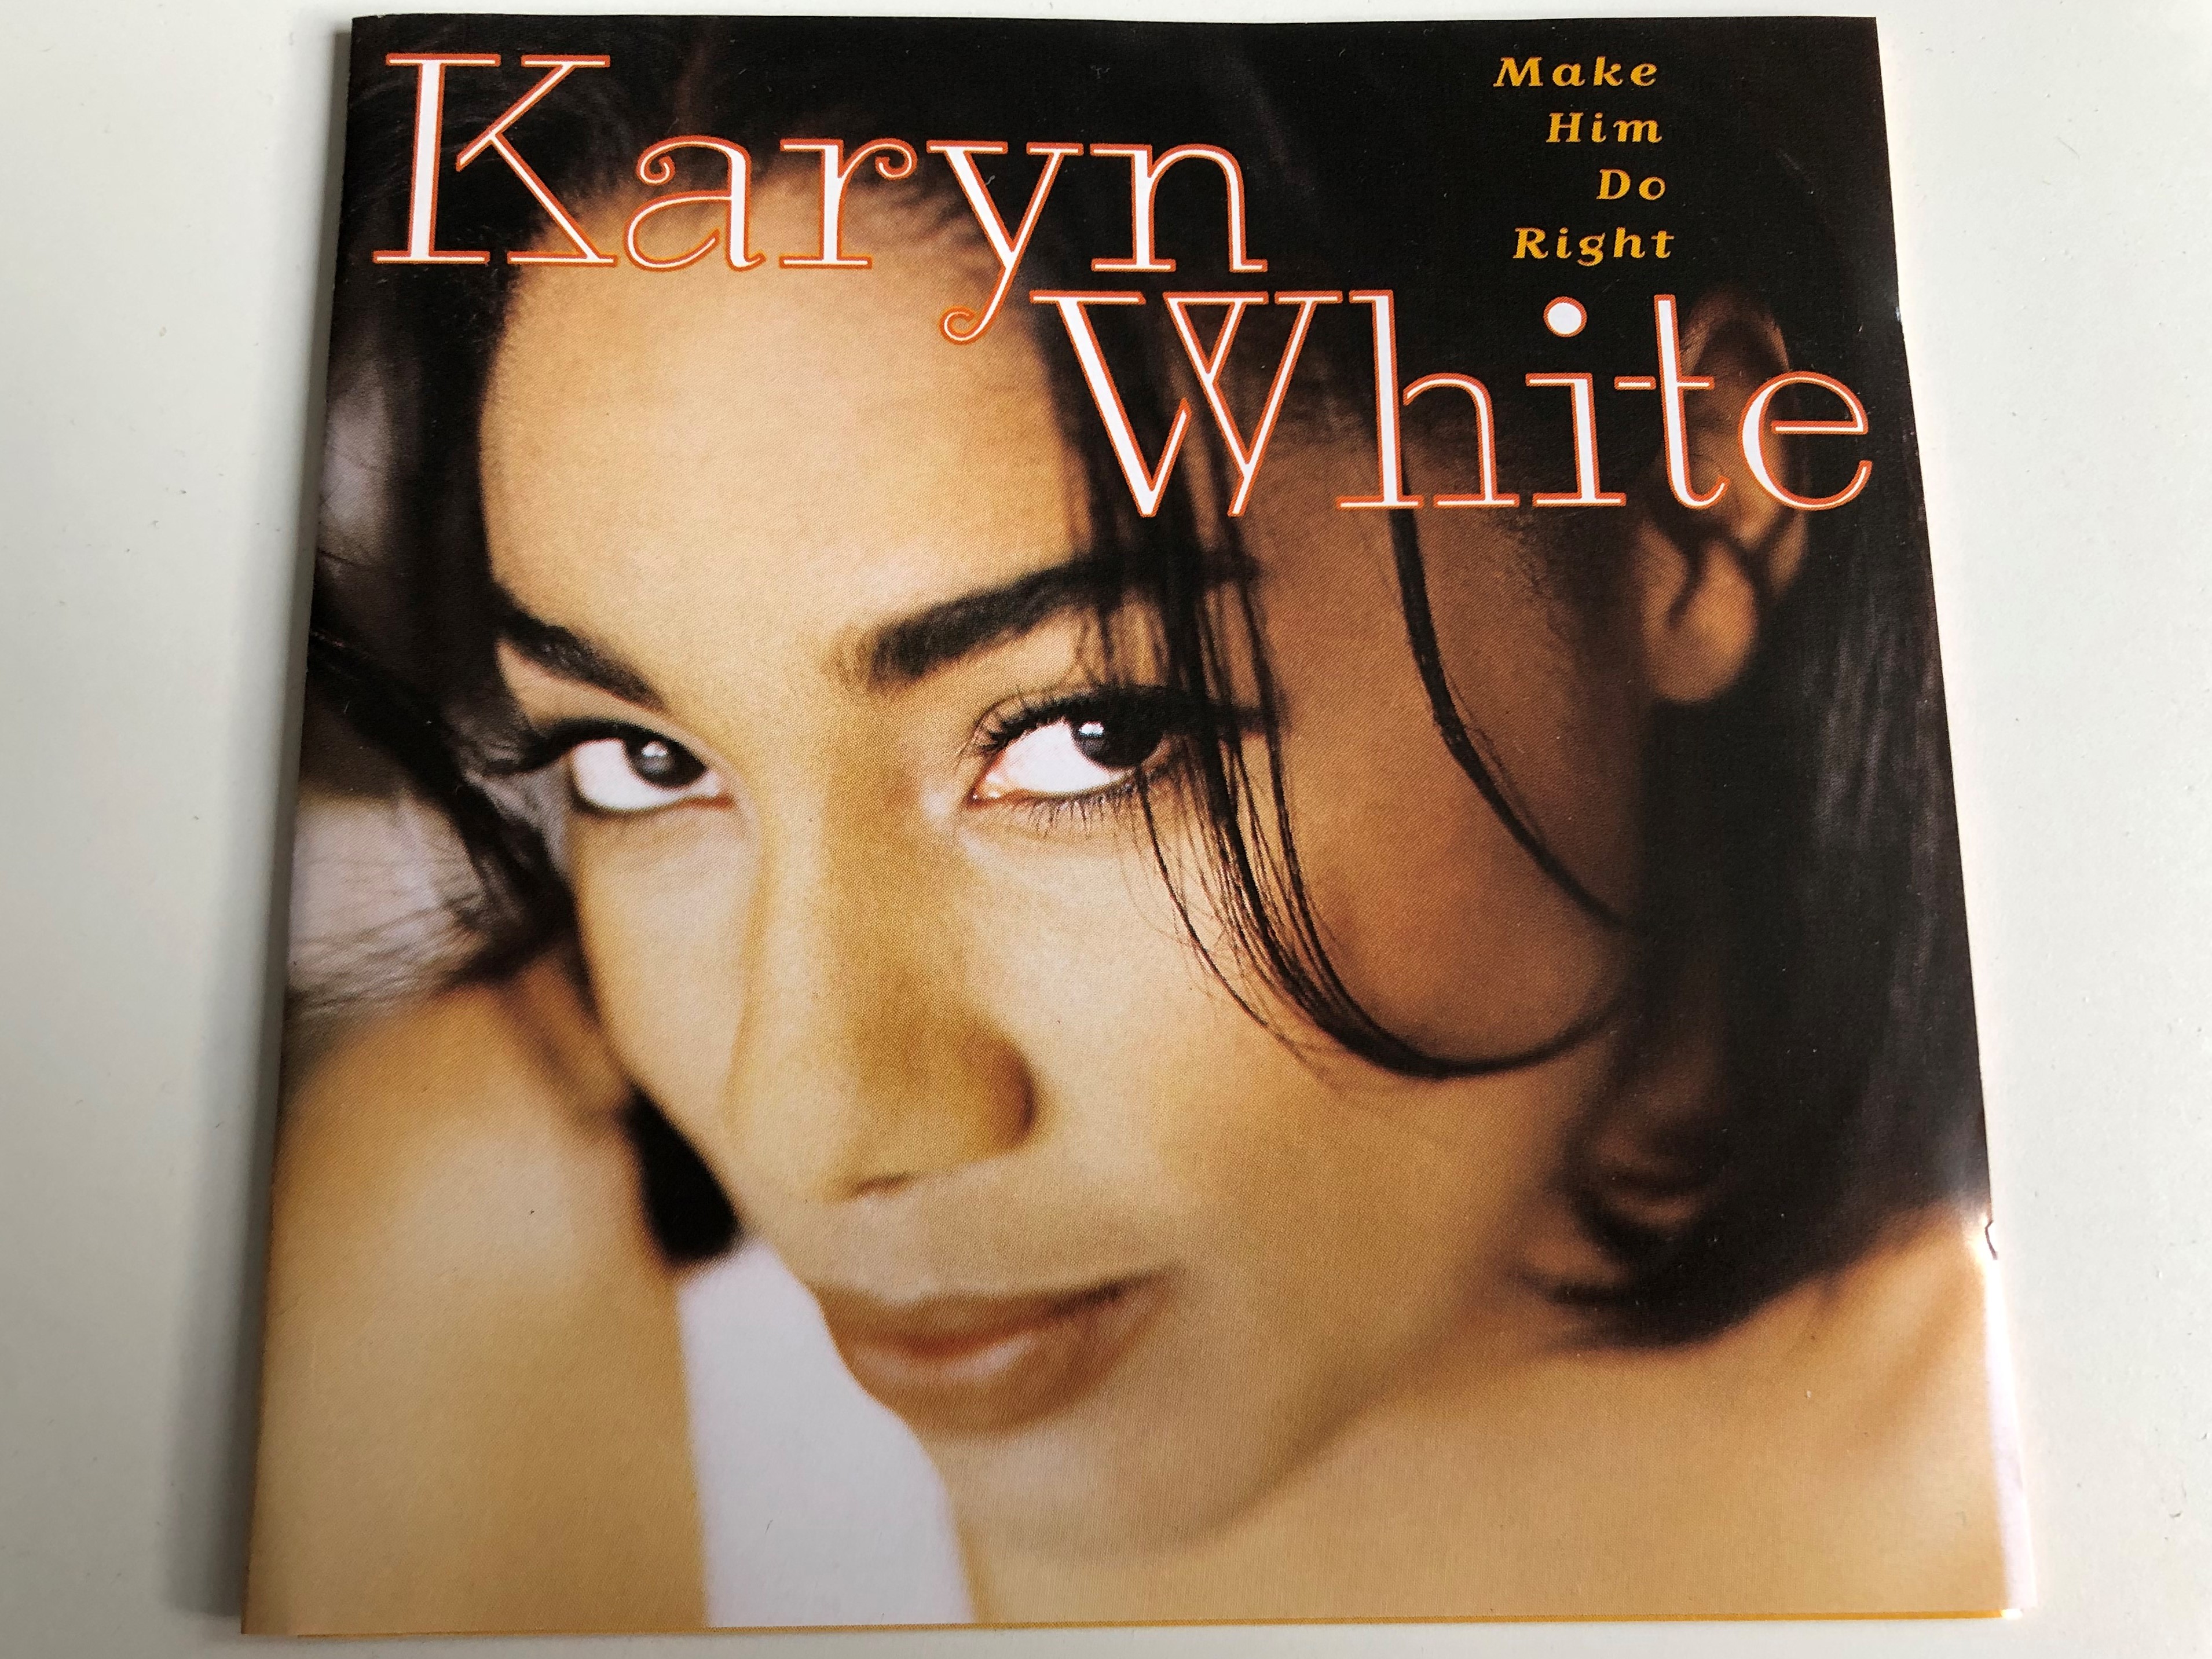 karyn-white-make-him-do-right-can-i-stay-with-you-weakness-make-him-do-right-one-minute-audio-cd-1994-warner-music-europe-1-.jpg